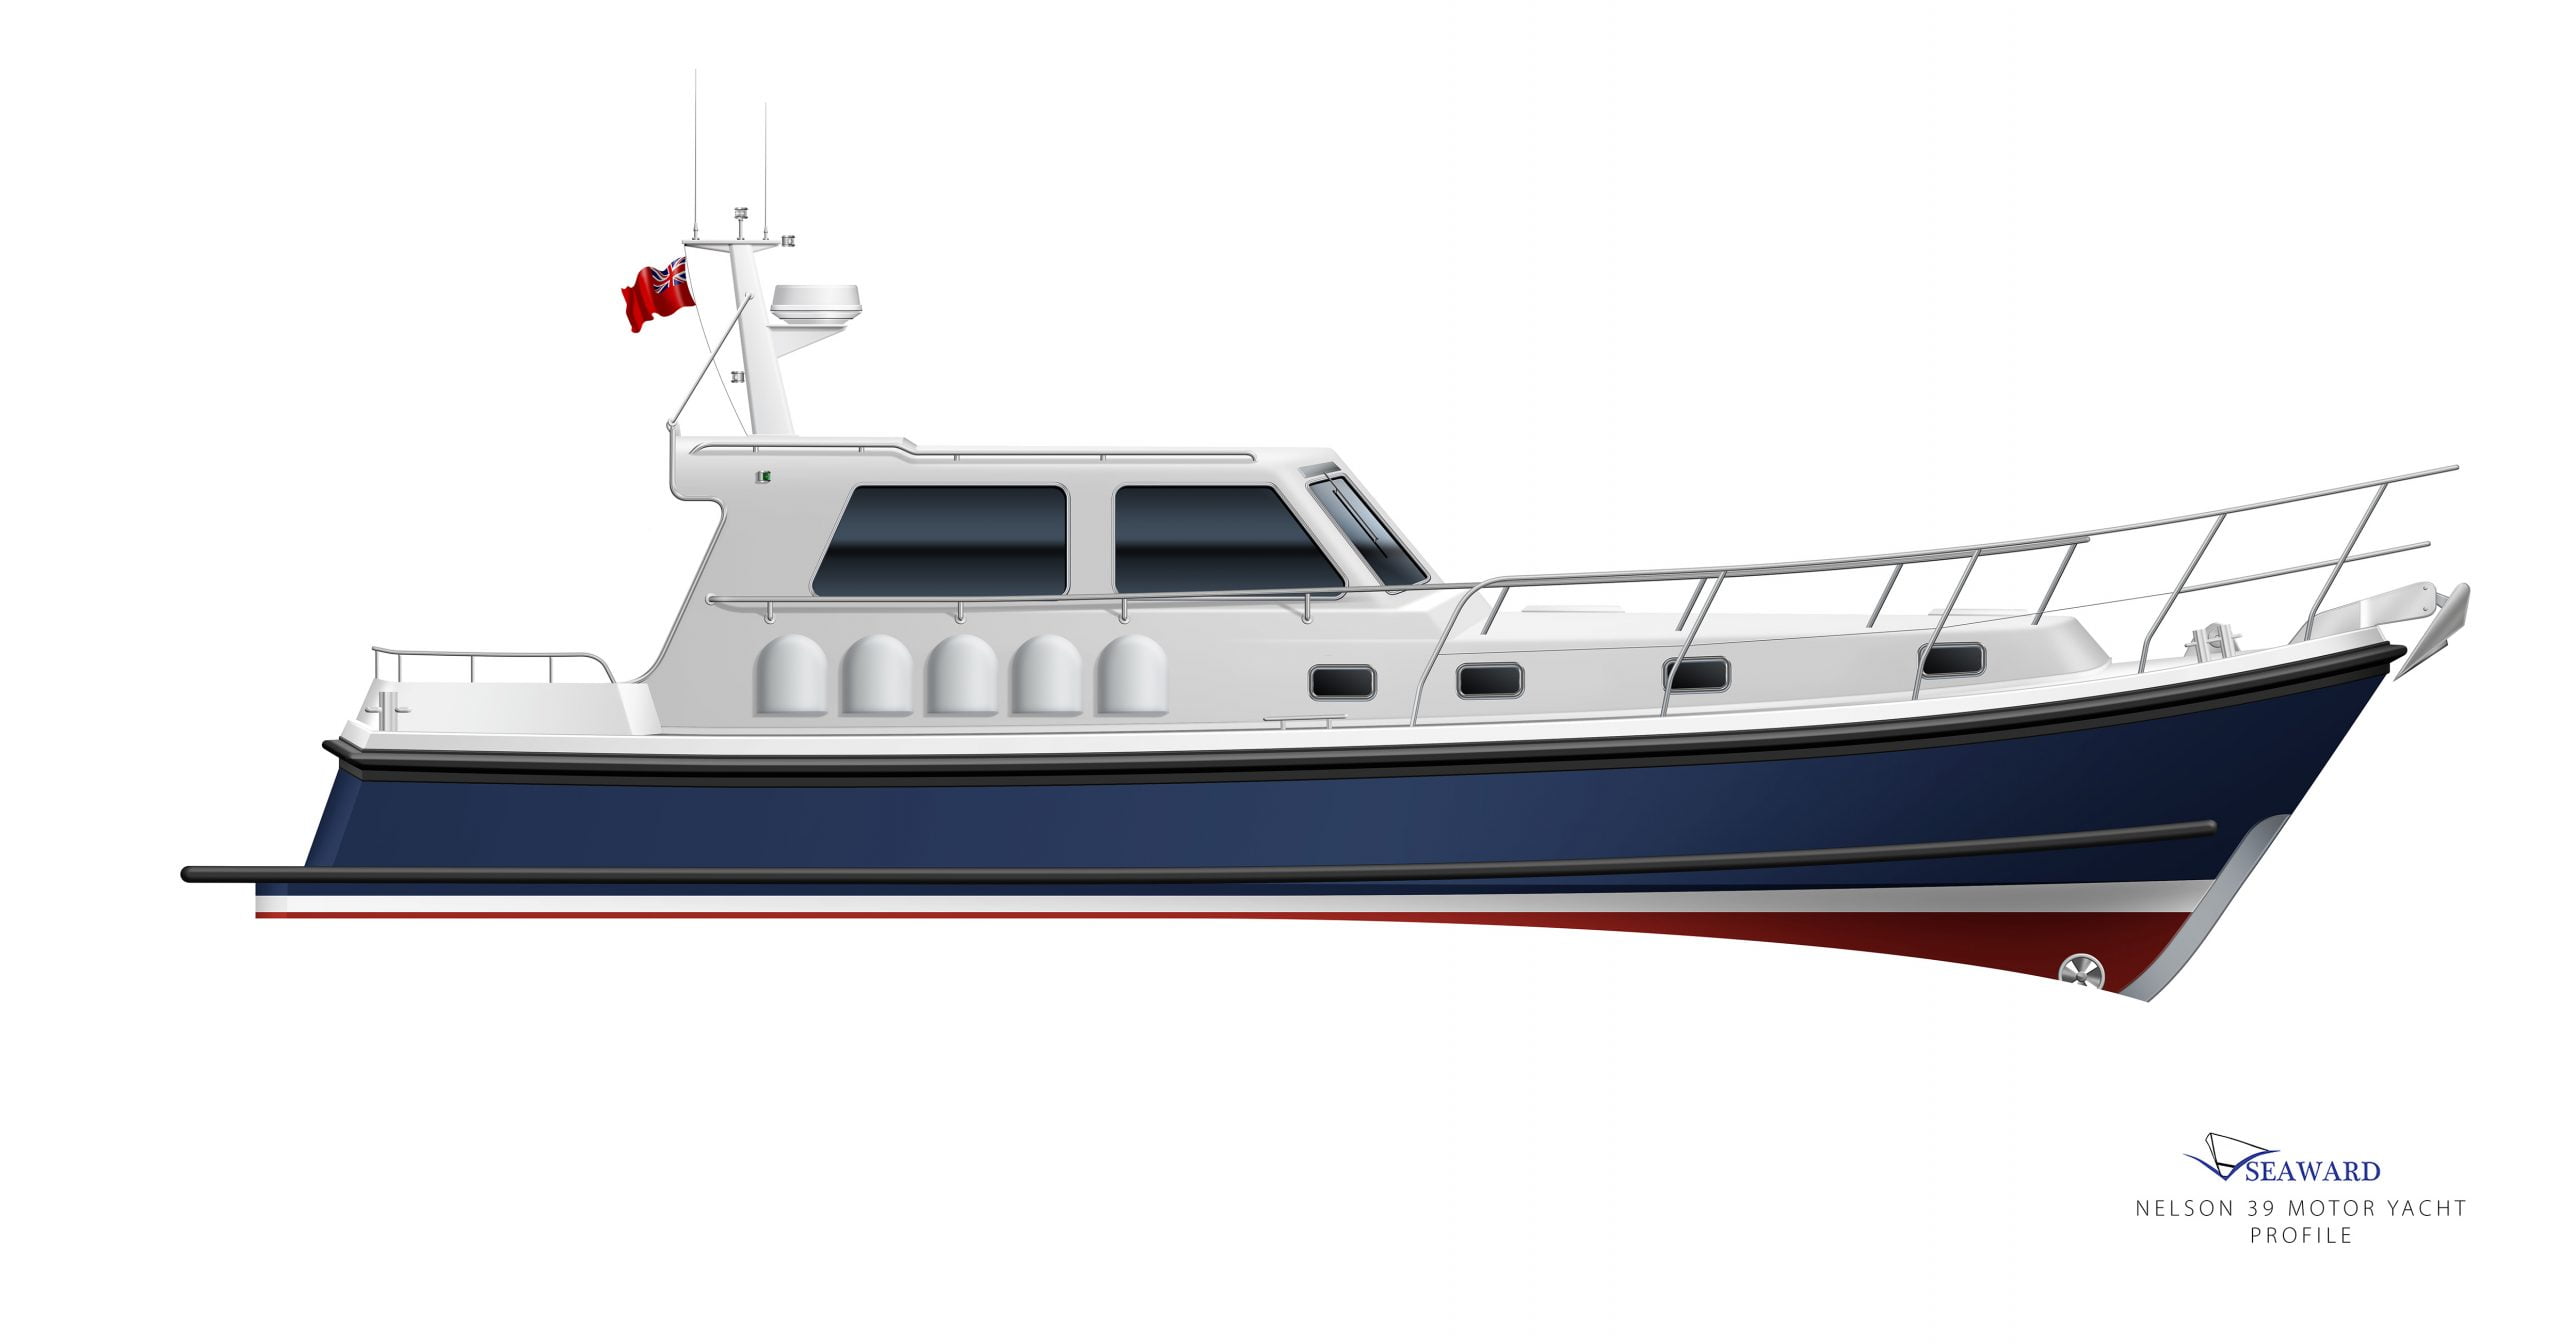 Mike Burnham leads research  and development for two new Nelson motor yacht models